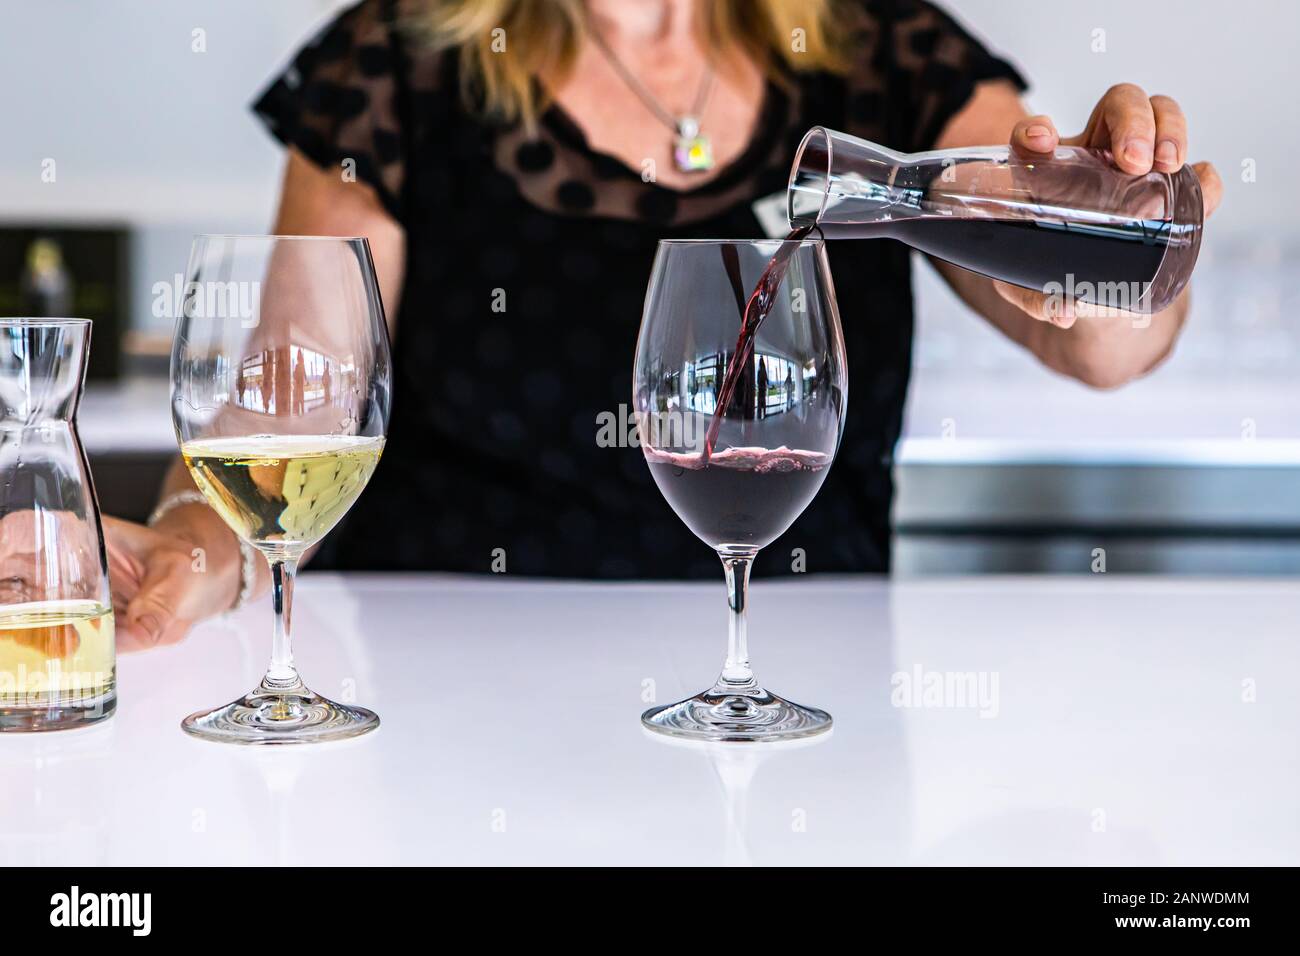 female bartender hand close up as she pouring red wine from a small mini decanter to the wineglass, next to a white glass of wine, bright bar counter Stock Photo